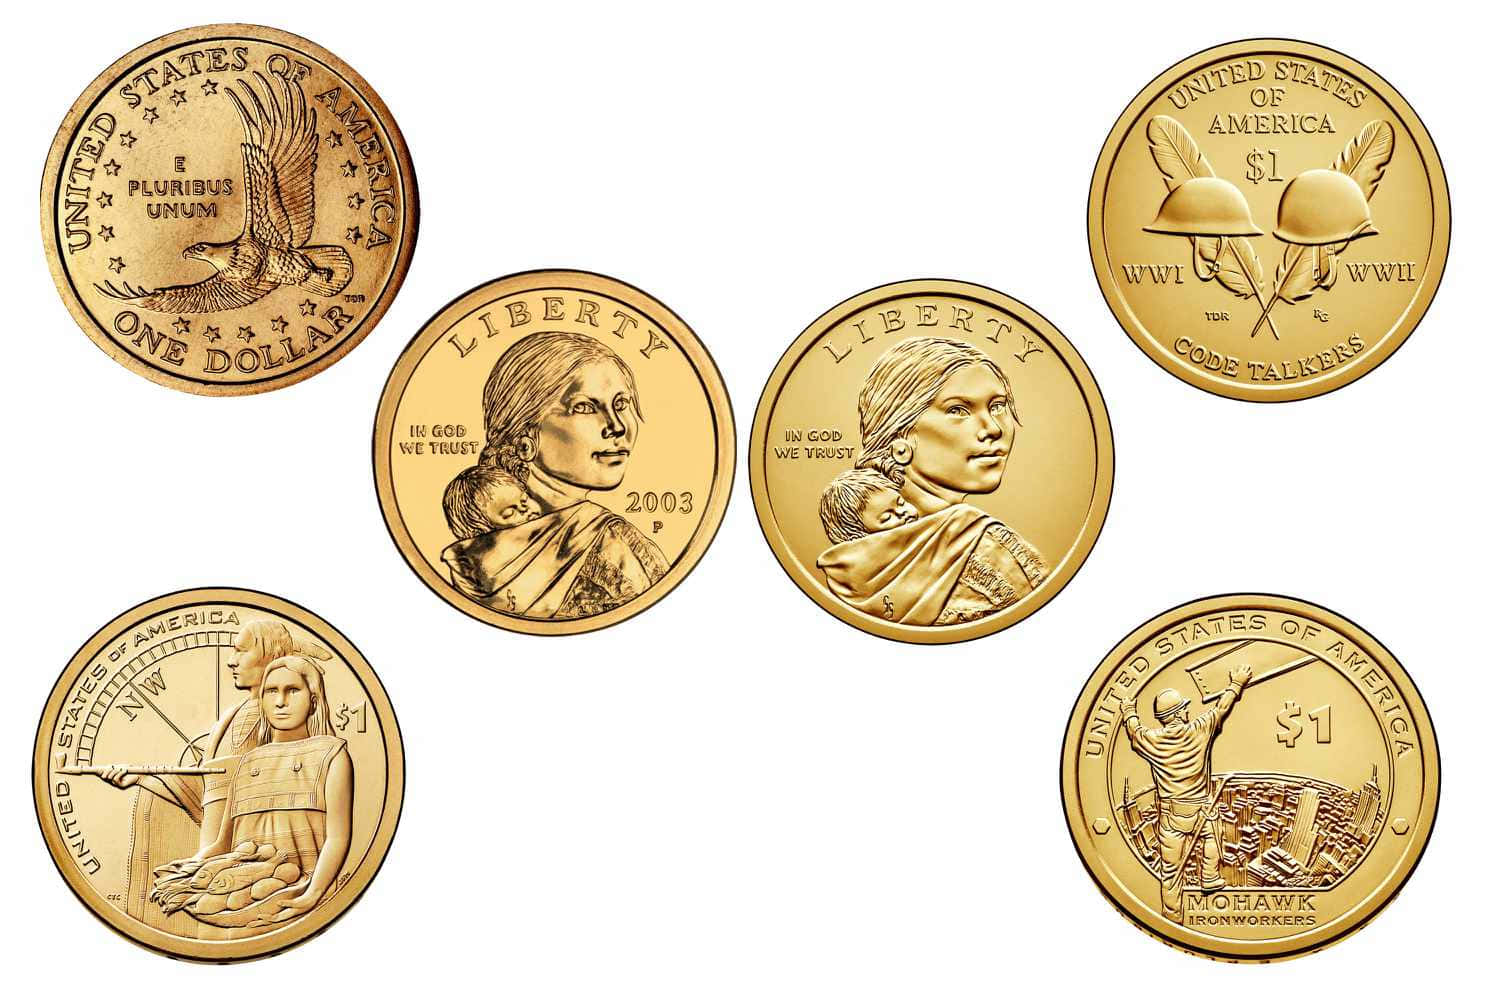 Four Gold Coins With Different Designs